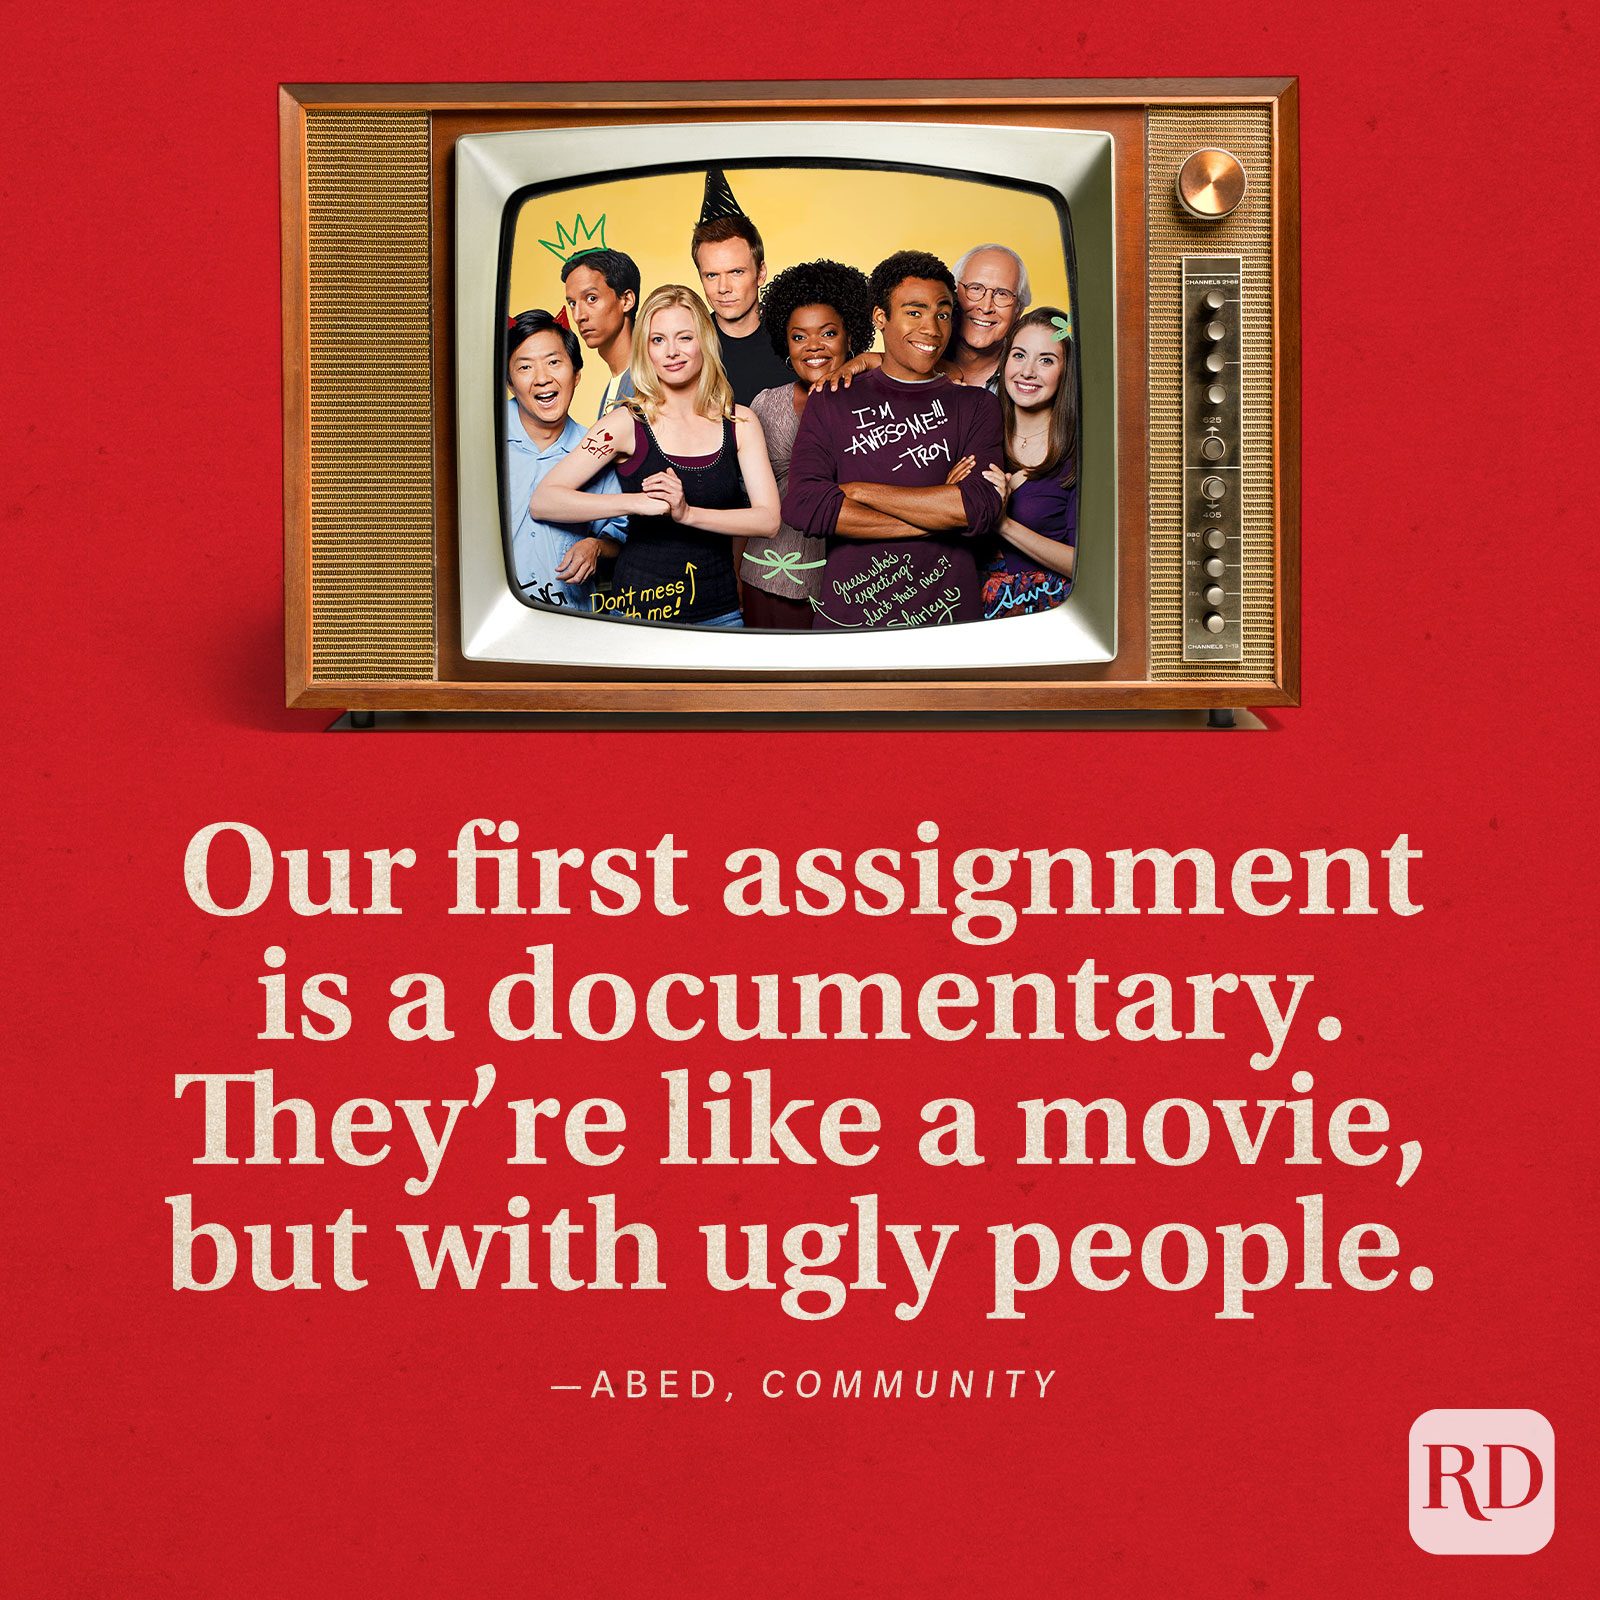  “Our first assignment is a documentary. They’re like a movie, but with ugly people.” -Abed in Community.